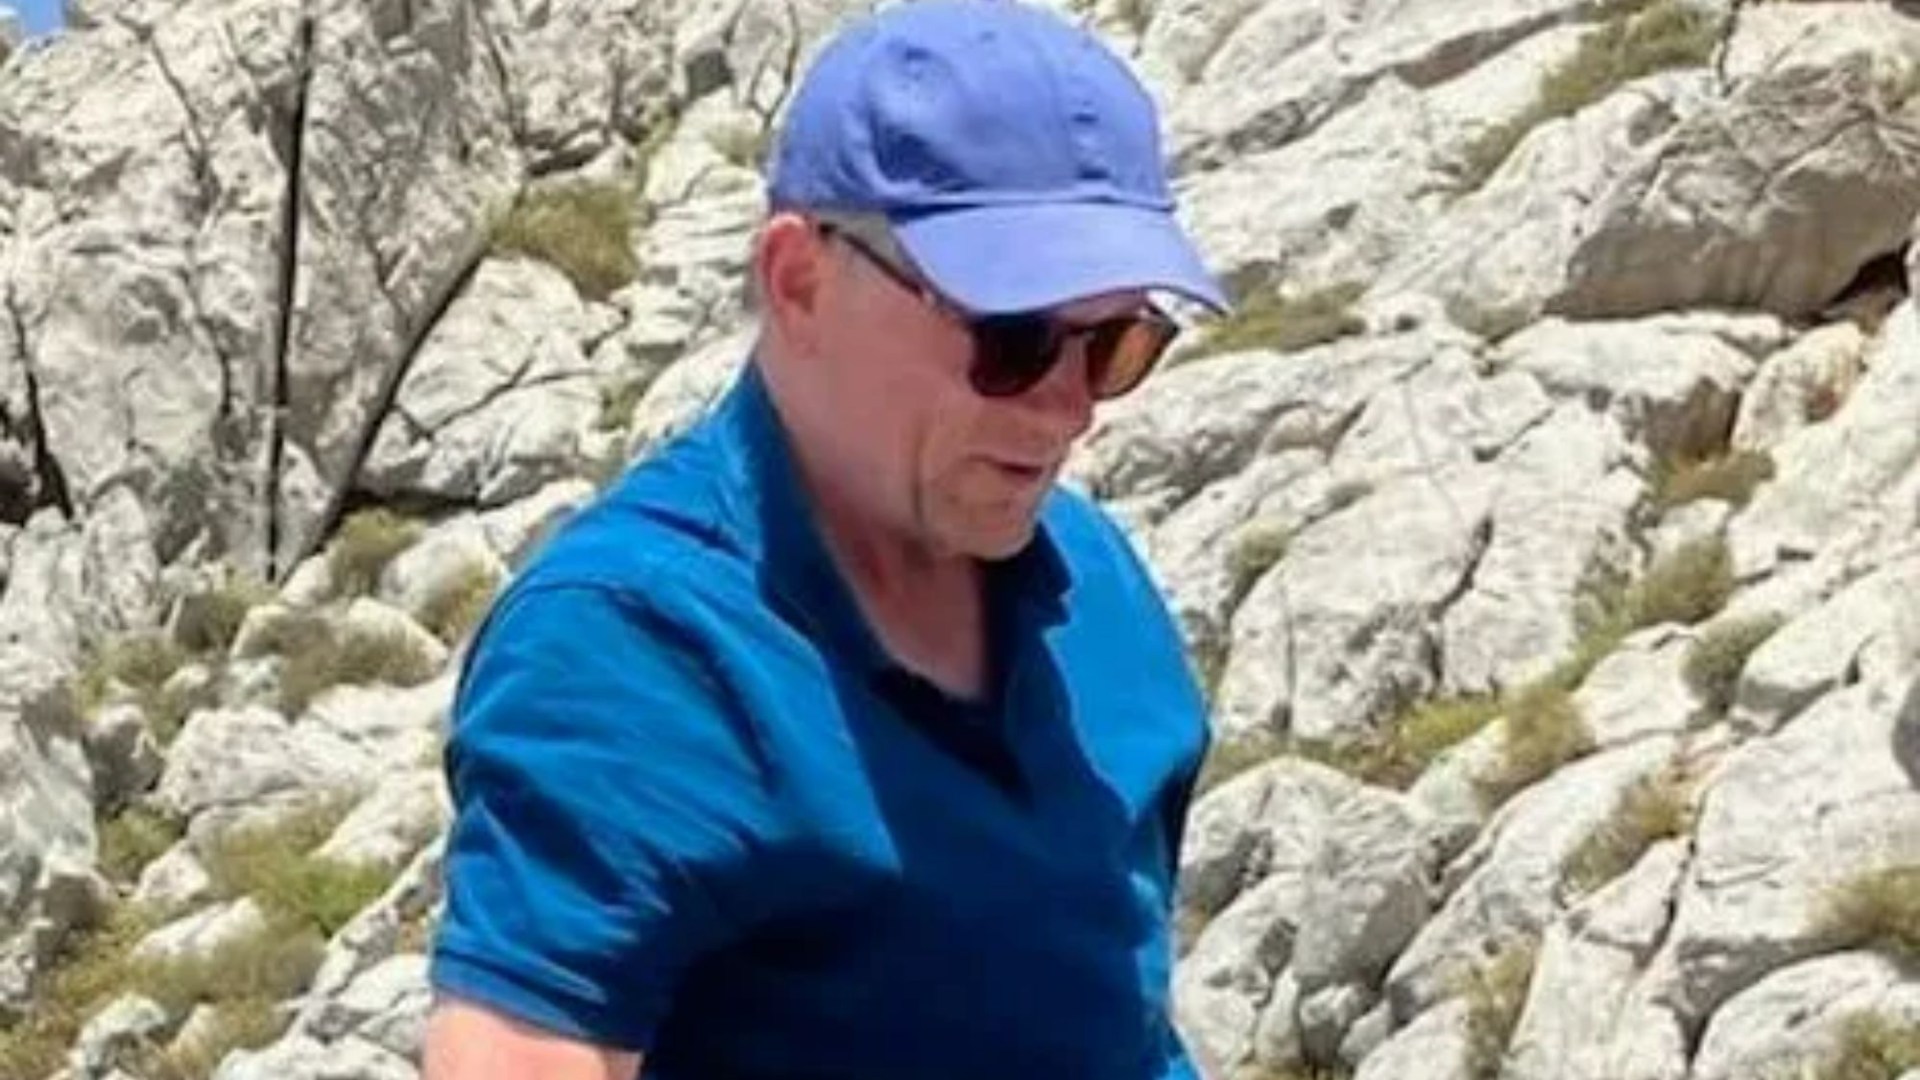 Dr Michael Mosley lay in position used to stop fainting before he died of ‘natural causes’ in 40C heat yards from safety [Video]